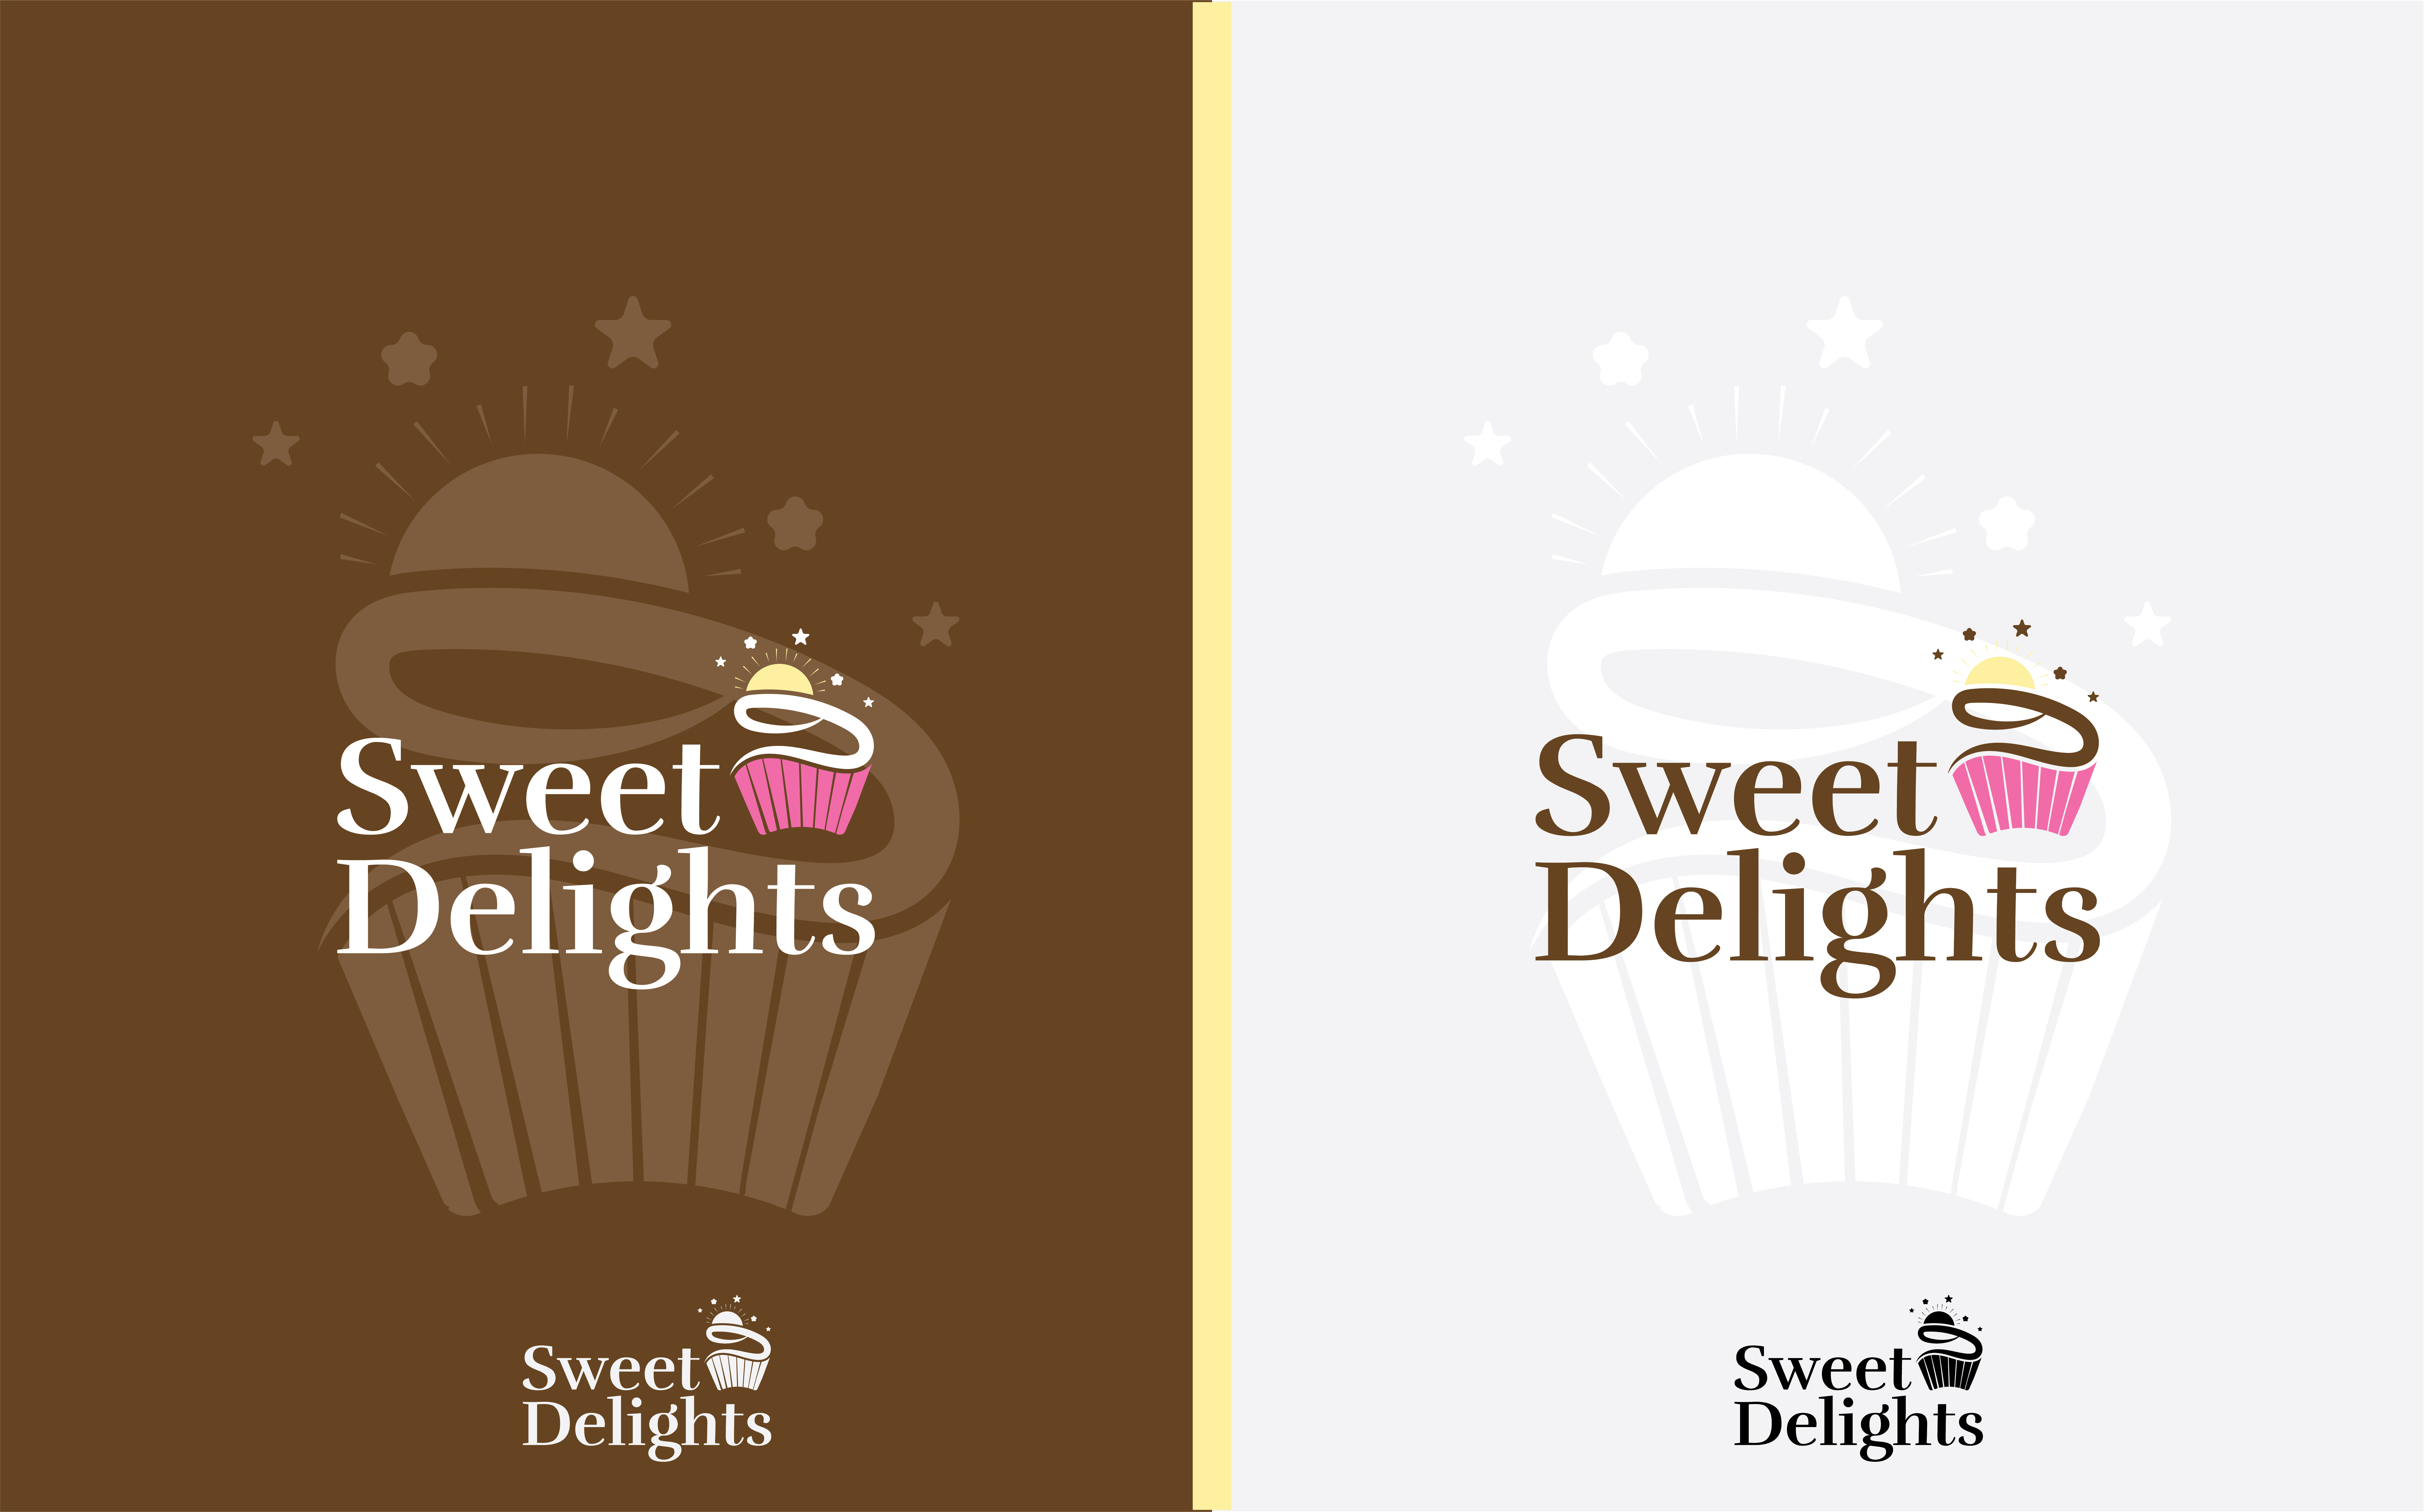 Sweet Delights - Custom cake and cupcake bakery logo design by